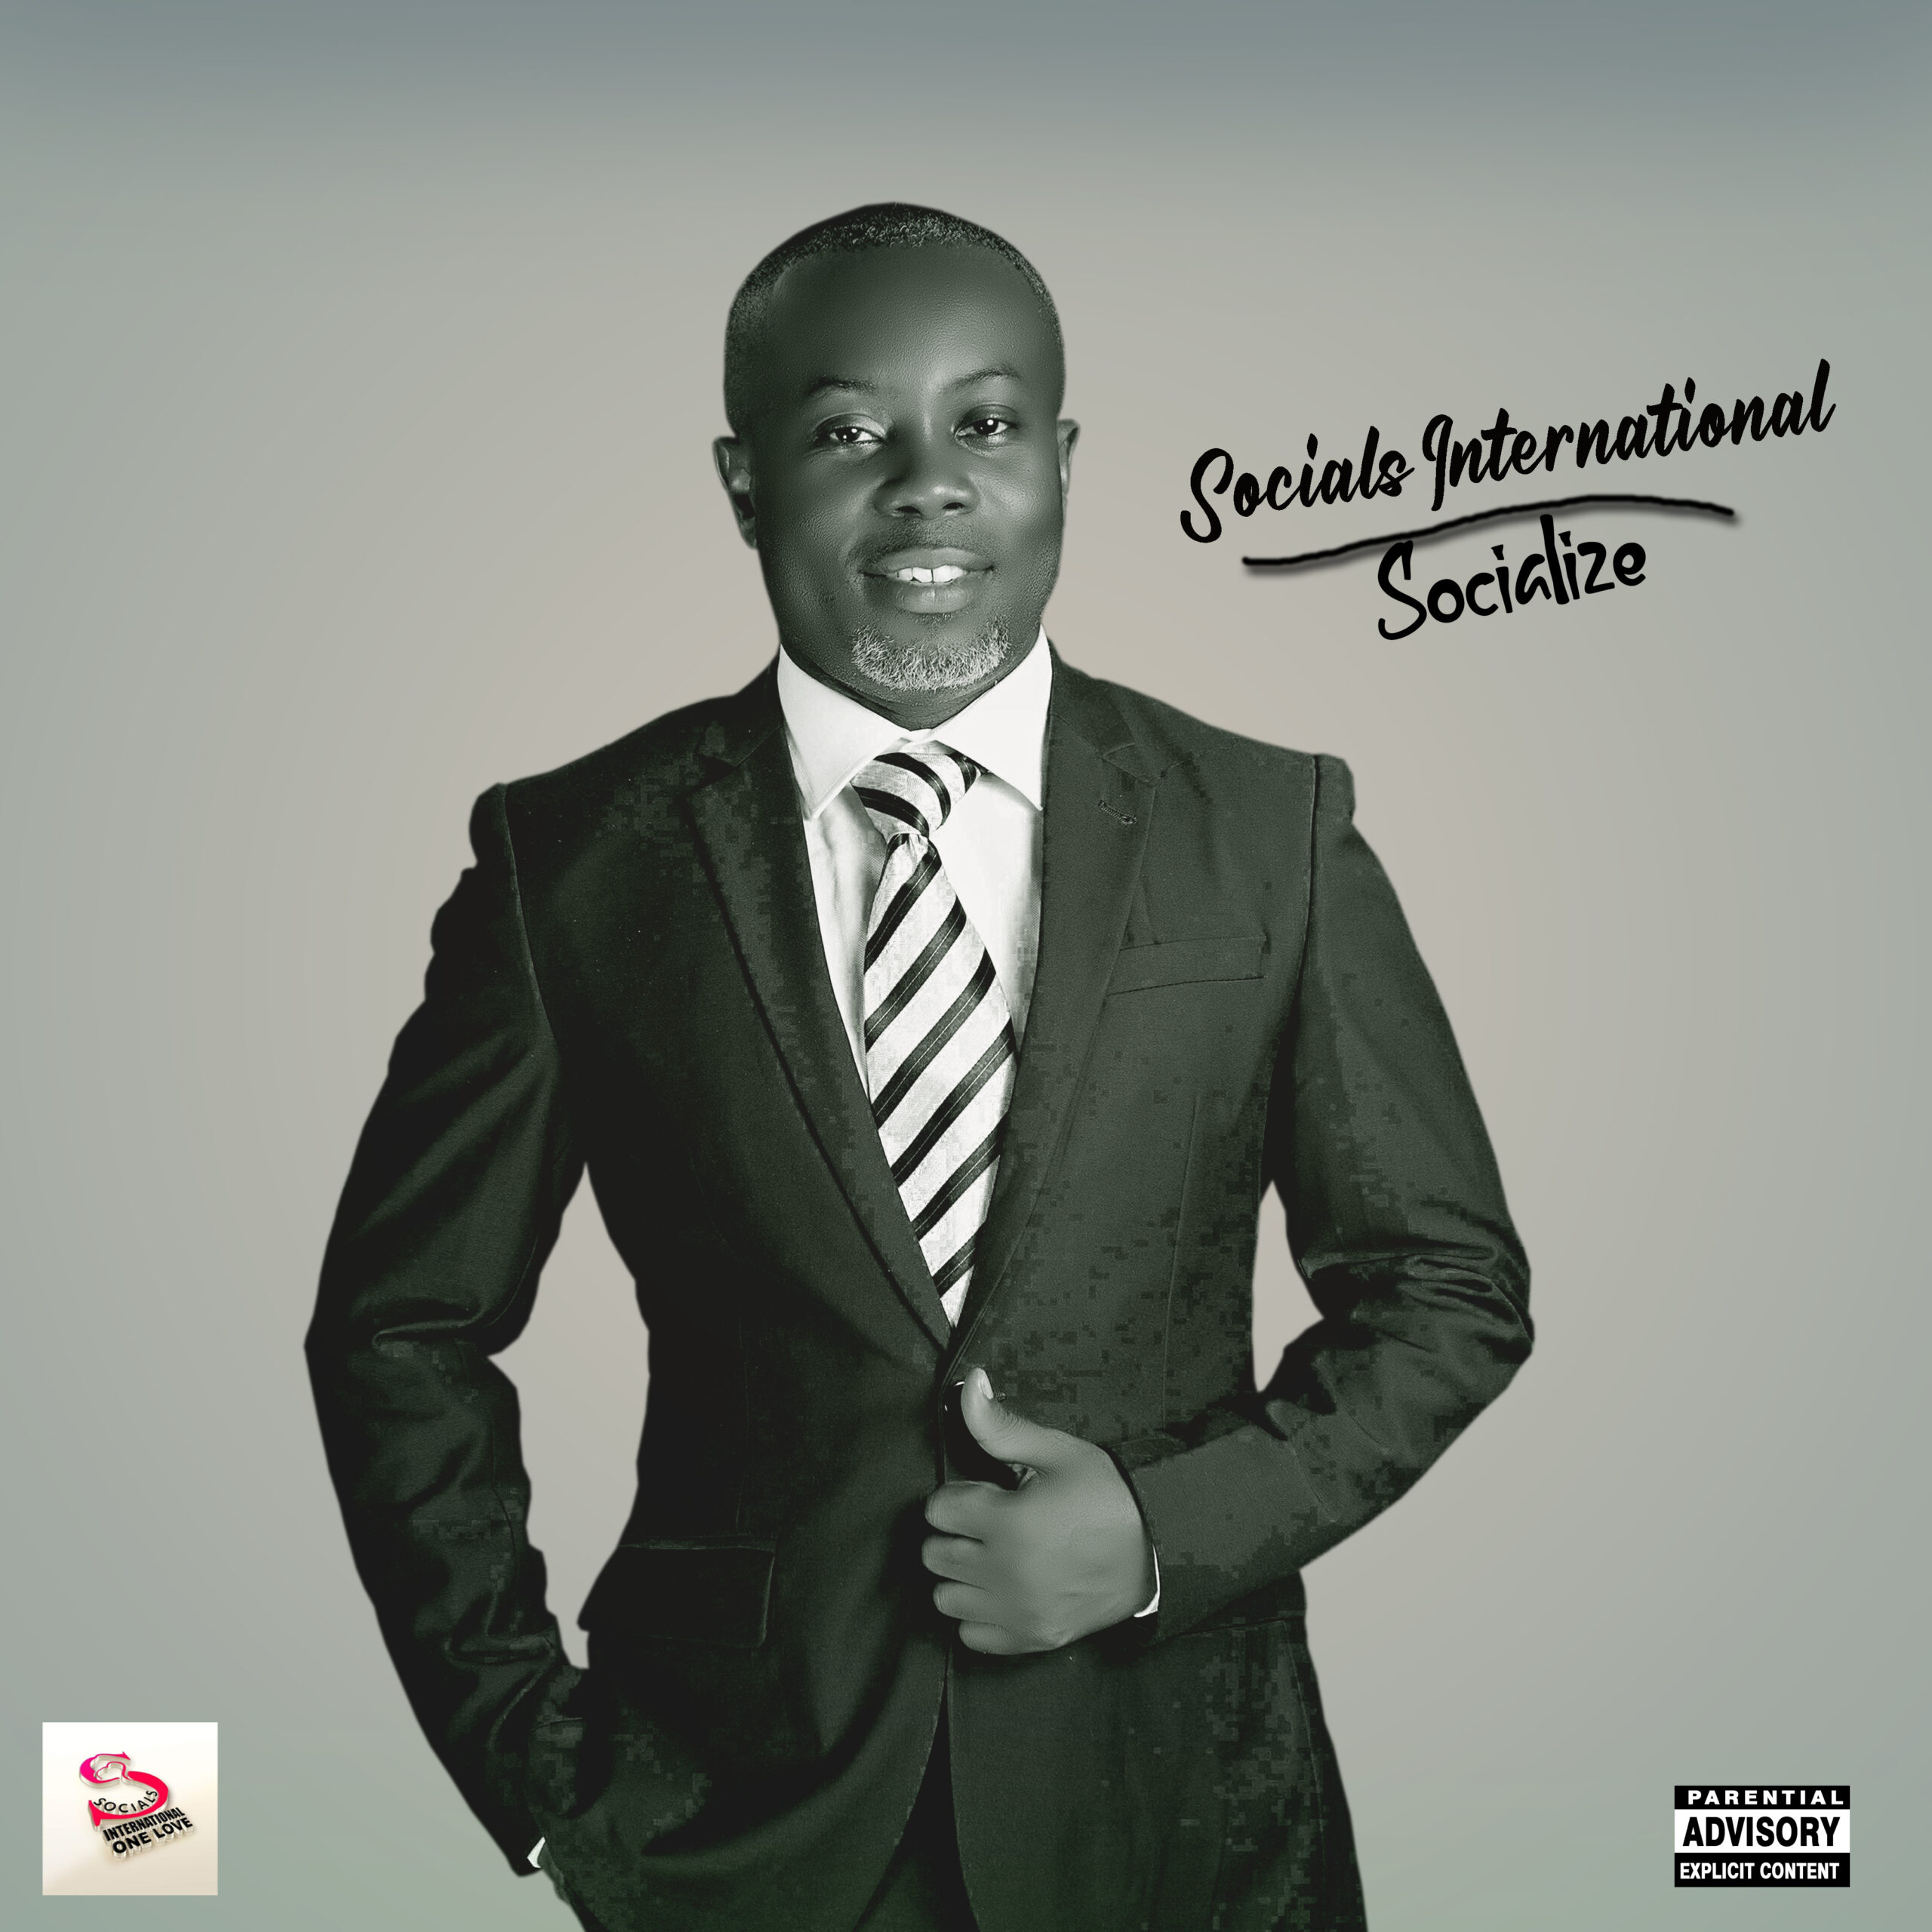 Listen To The New Socials International Album Tagged “SOCIALIZE” featuring Chiff Timz, Yawng Boss, Mas, Quiries, Arite and many more…